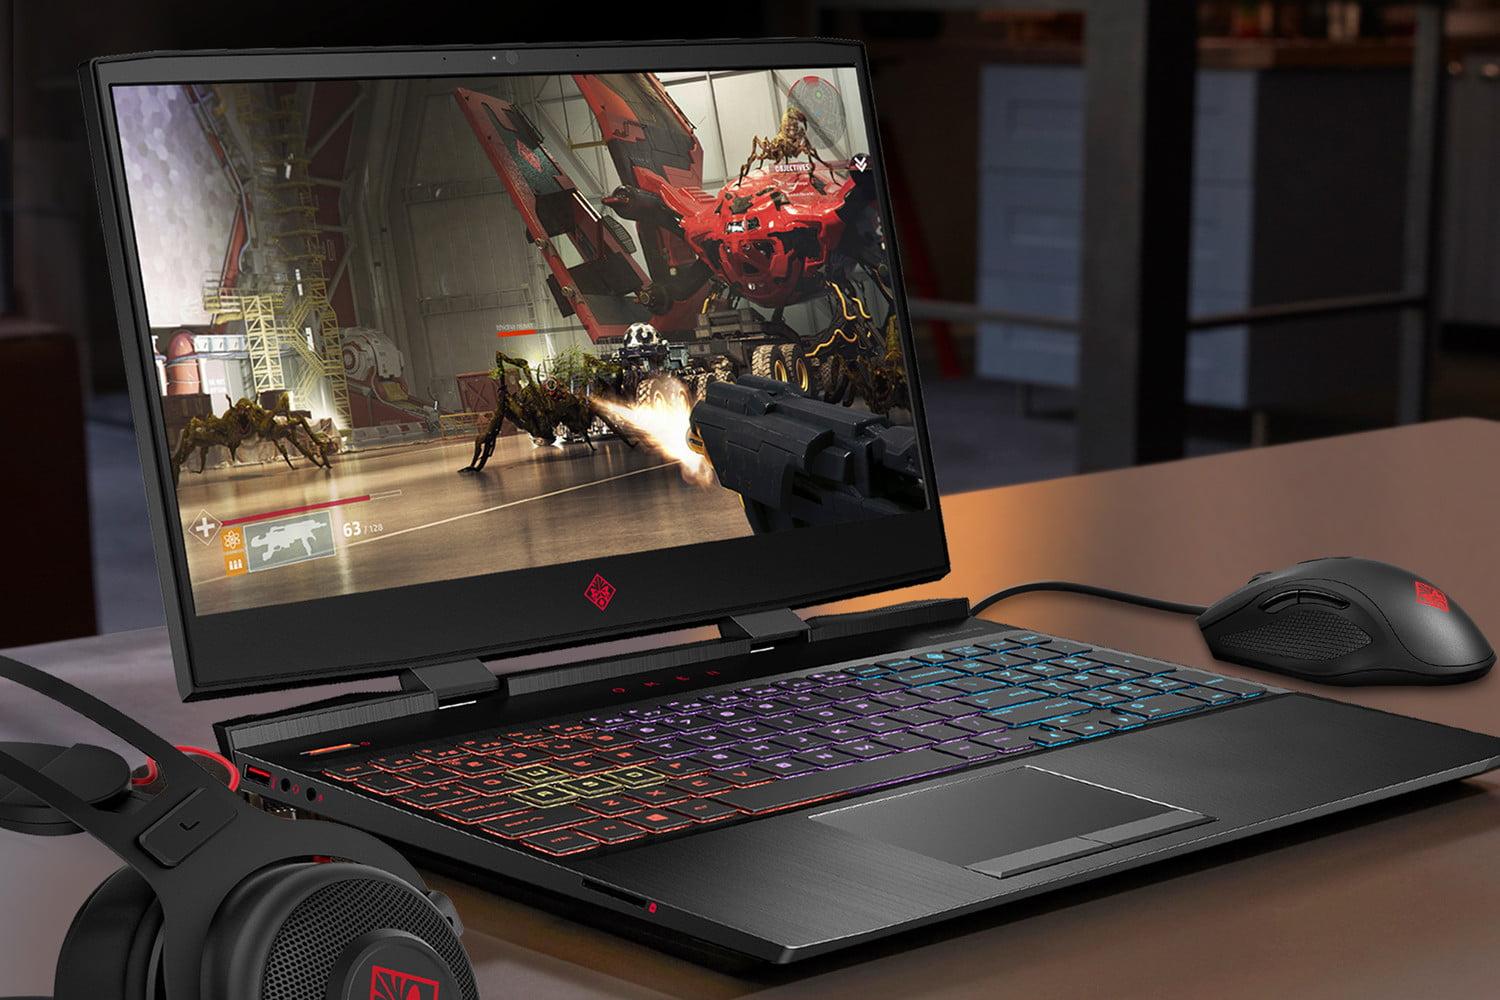 Cheap Gaming Laptops Acer, Dell, HP, And Razer In The Sale Bin At Best